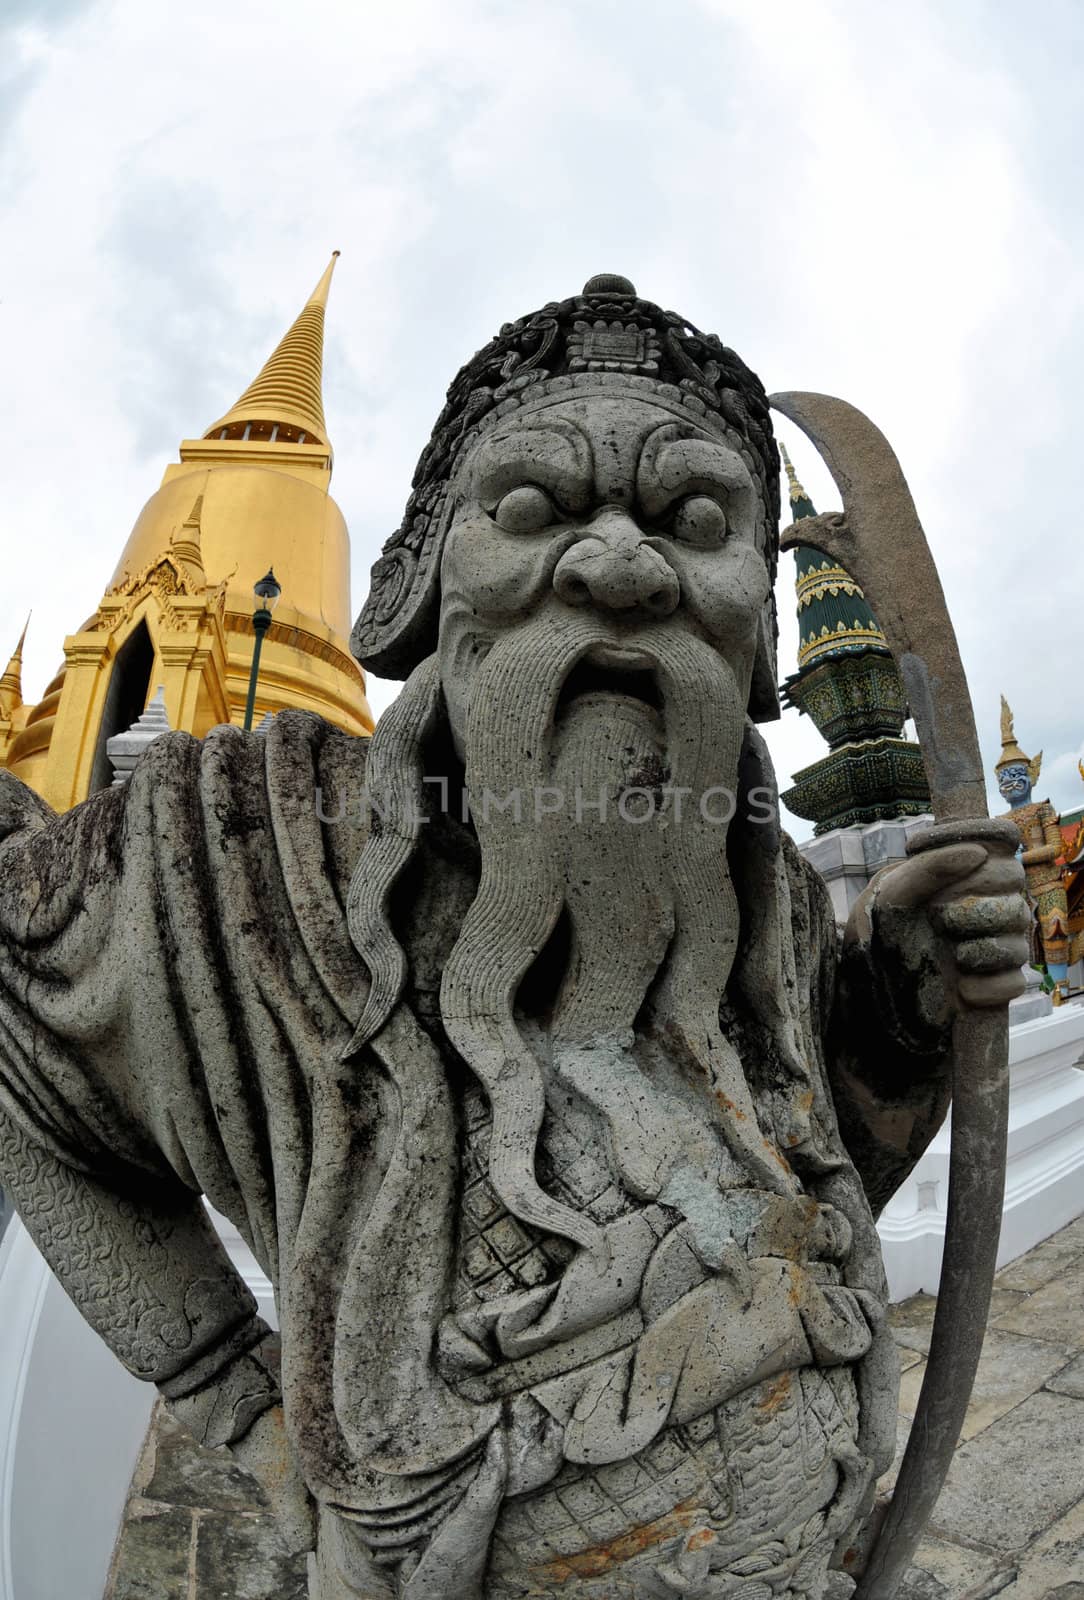 Guardian statue (yak) at the temple Wat phra kaew in the Grand palace area,
one of the major tourism attractions in Bangkok, Thailand

